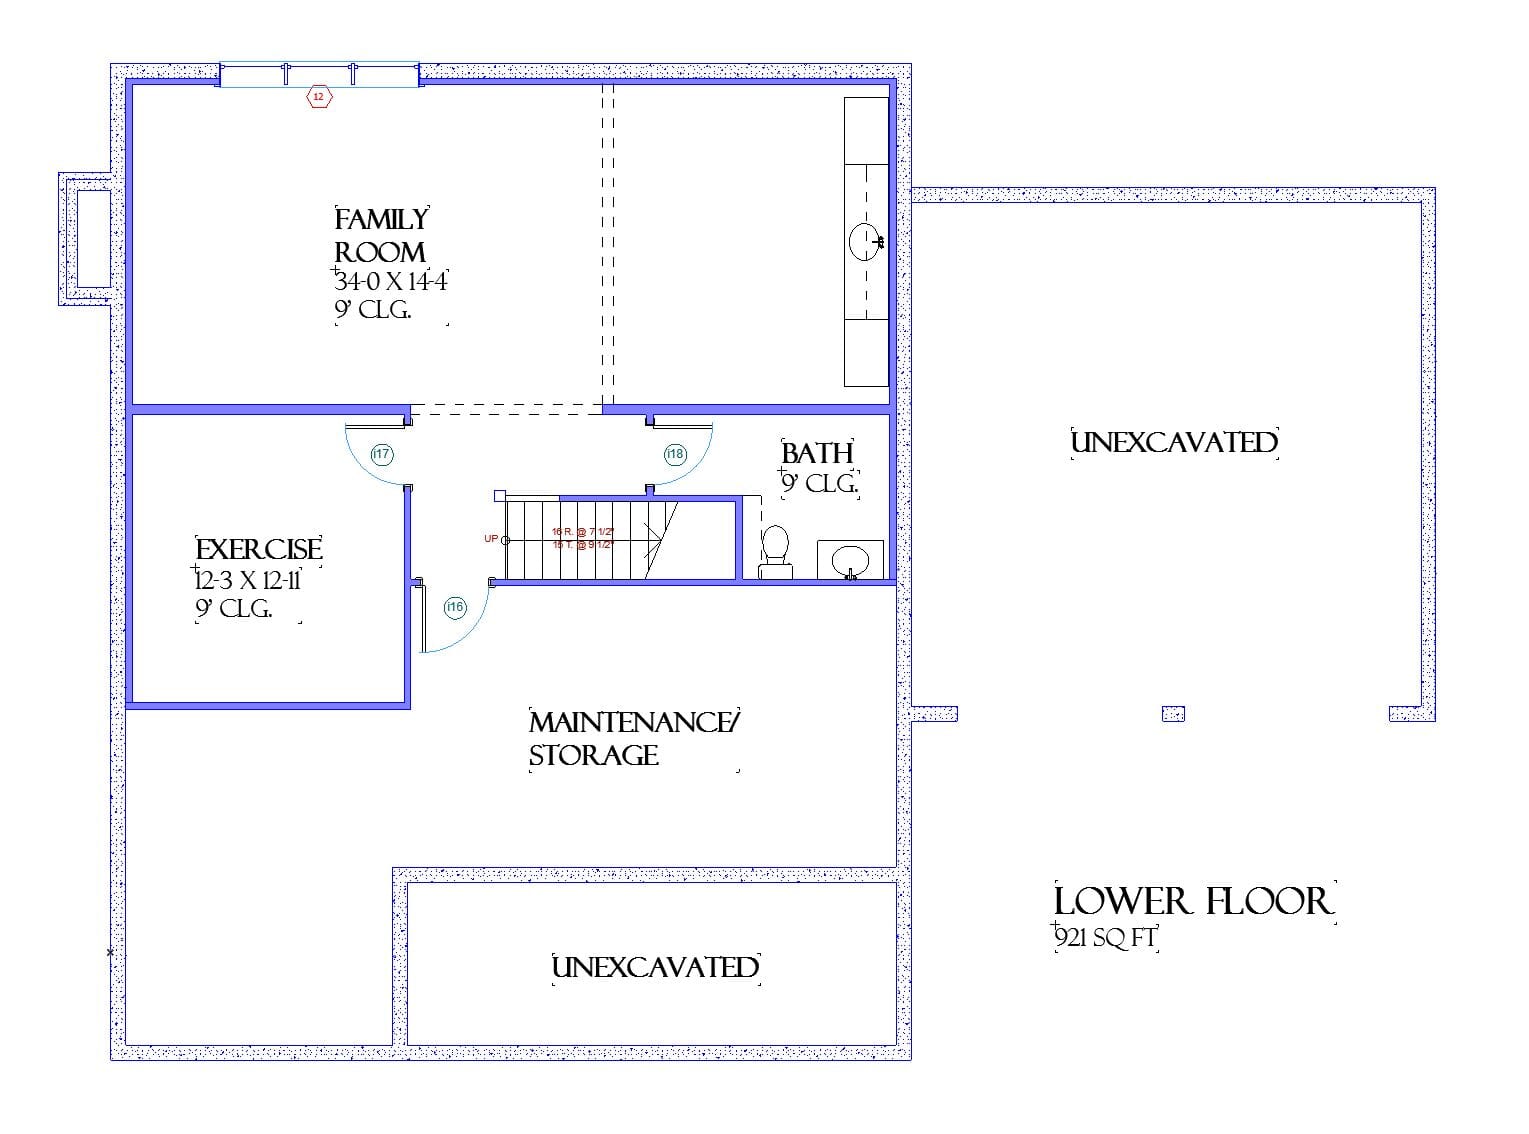 Adams - Traditional House Floor Plan - SketchPad House Plans